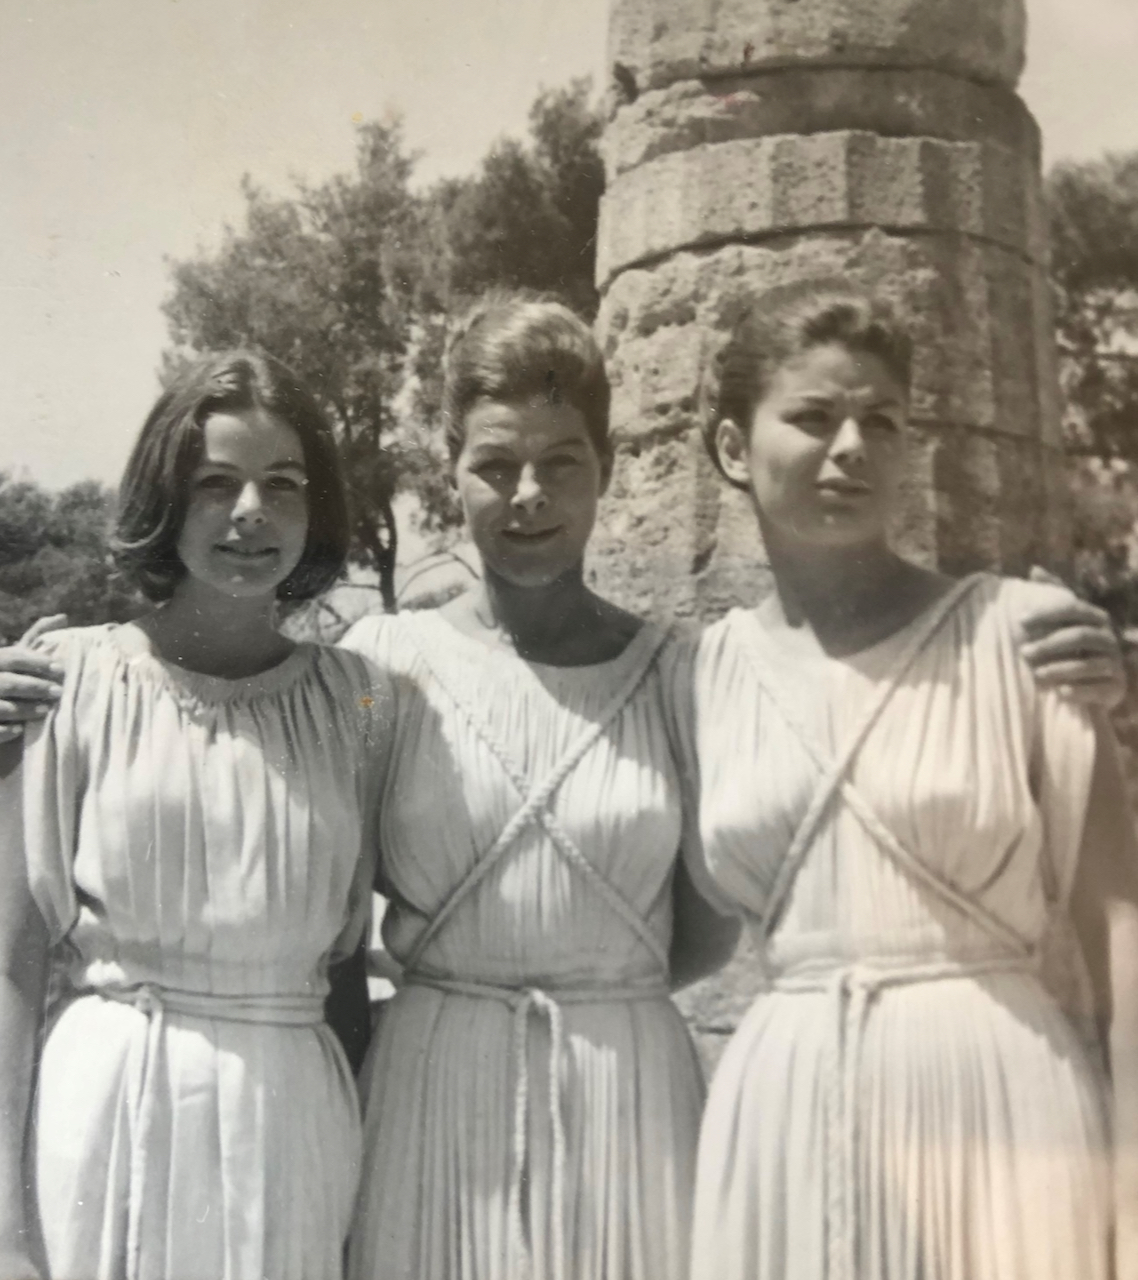 Katseli, her mother and sister dressed in ancient Greek garb in a 1960s photo.